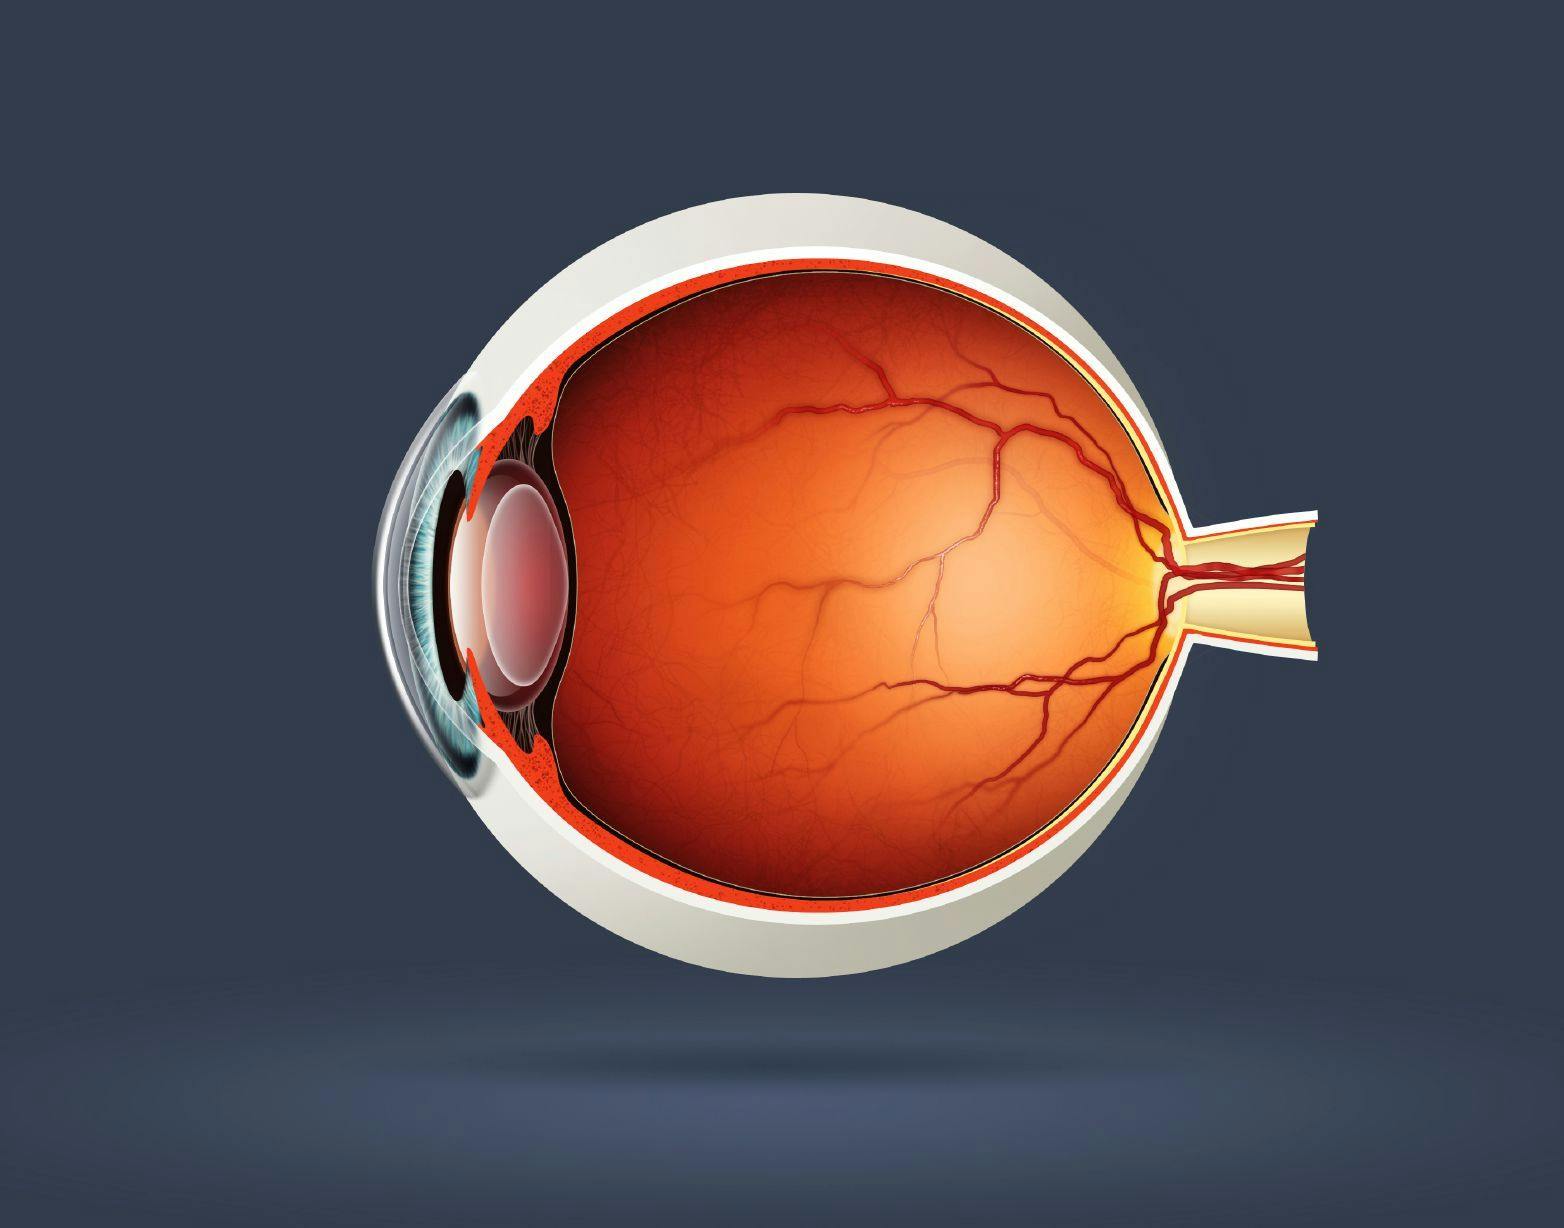 Structure of human eye. In side view | Image credit: svetazi - stock.adobe.com